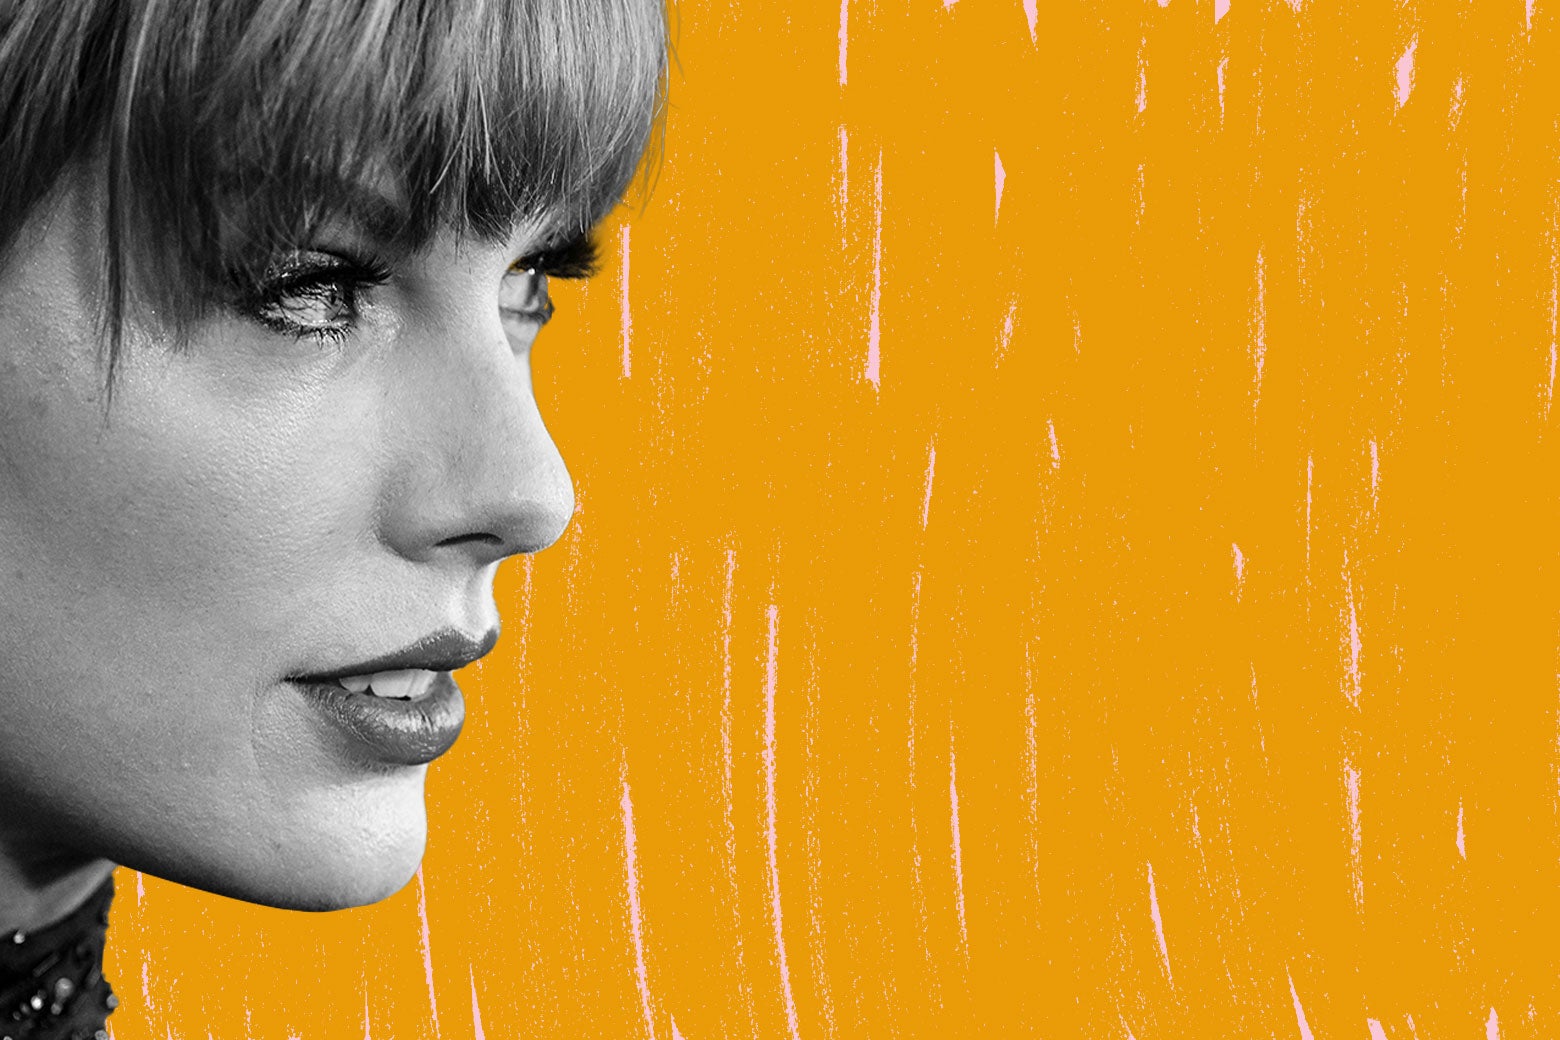 Who Are the Songs on Taylor Swift’s New Album Really About? We Break It All Down.